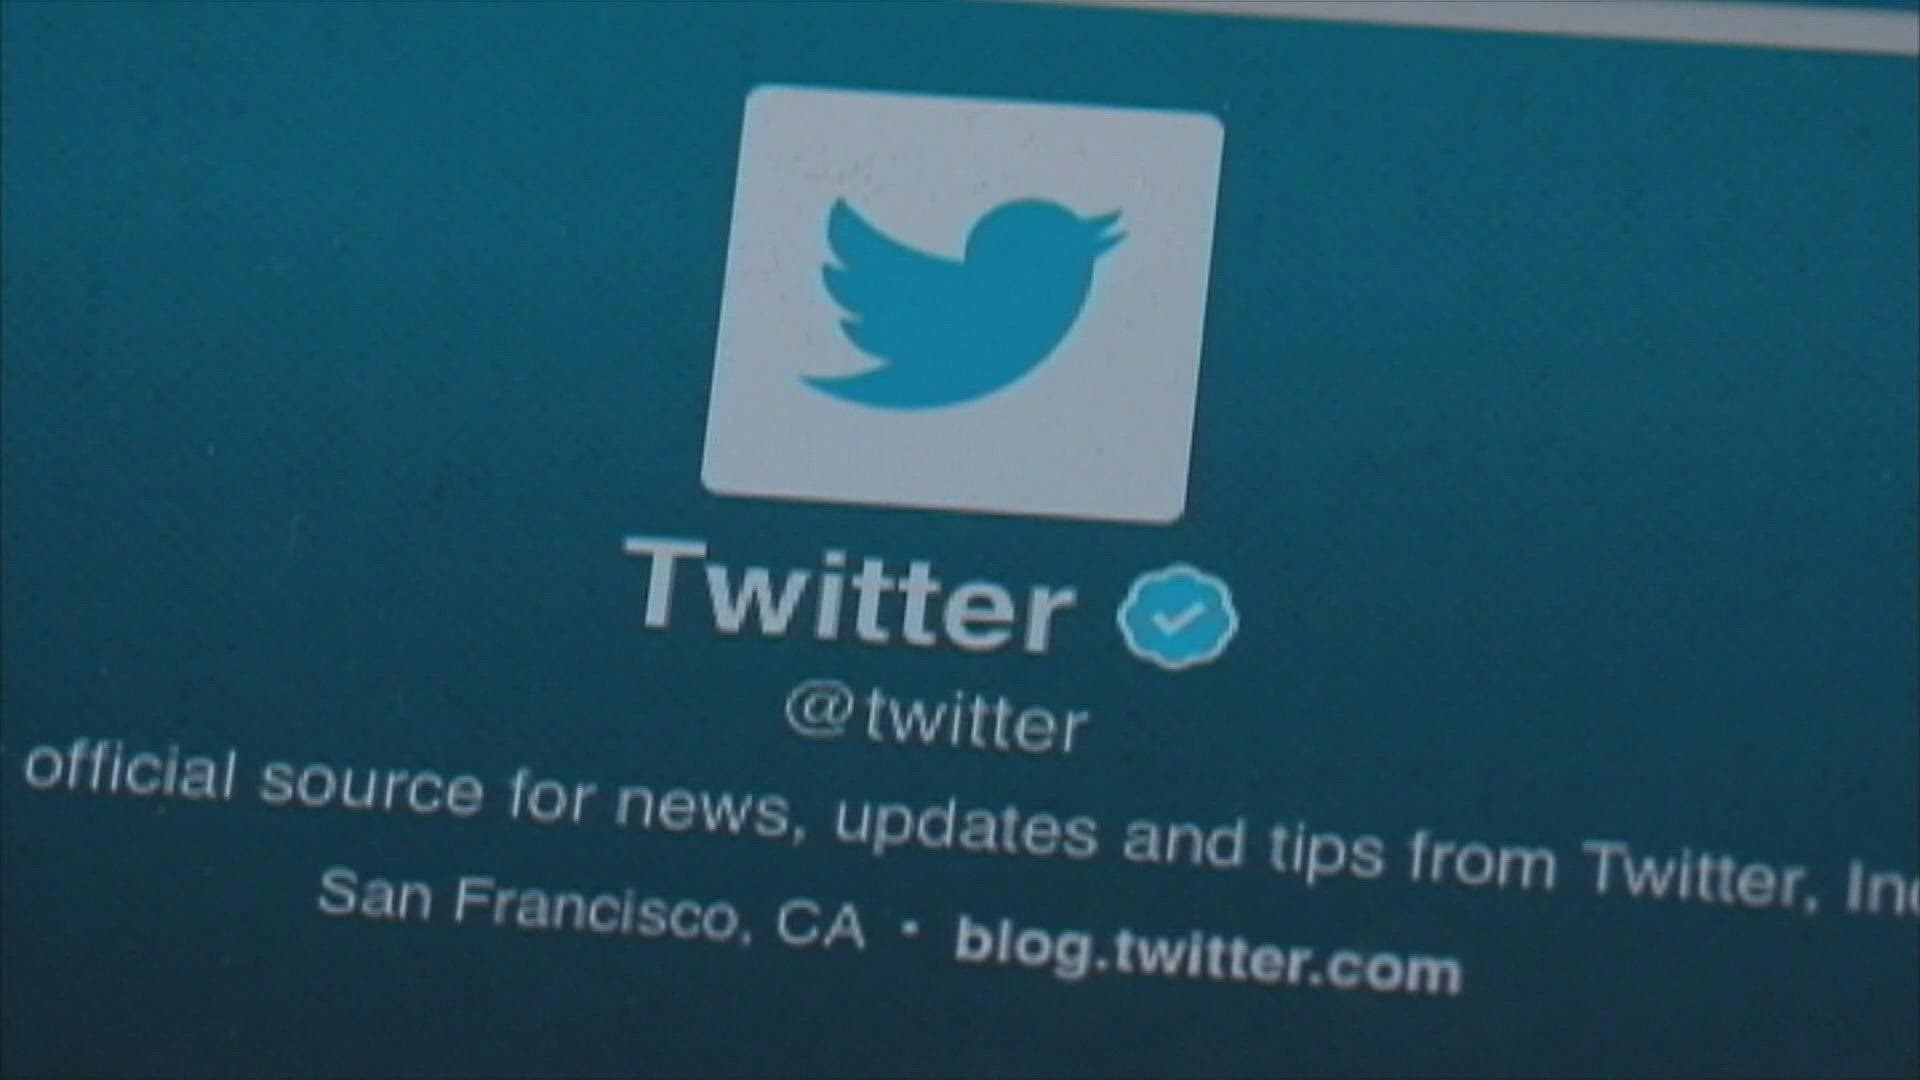 After weeks of back-and-forth, Twitter announced a $44 billion deal.